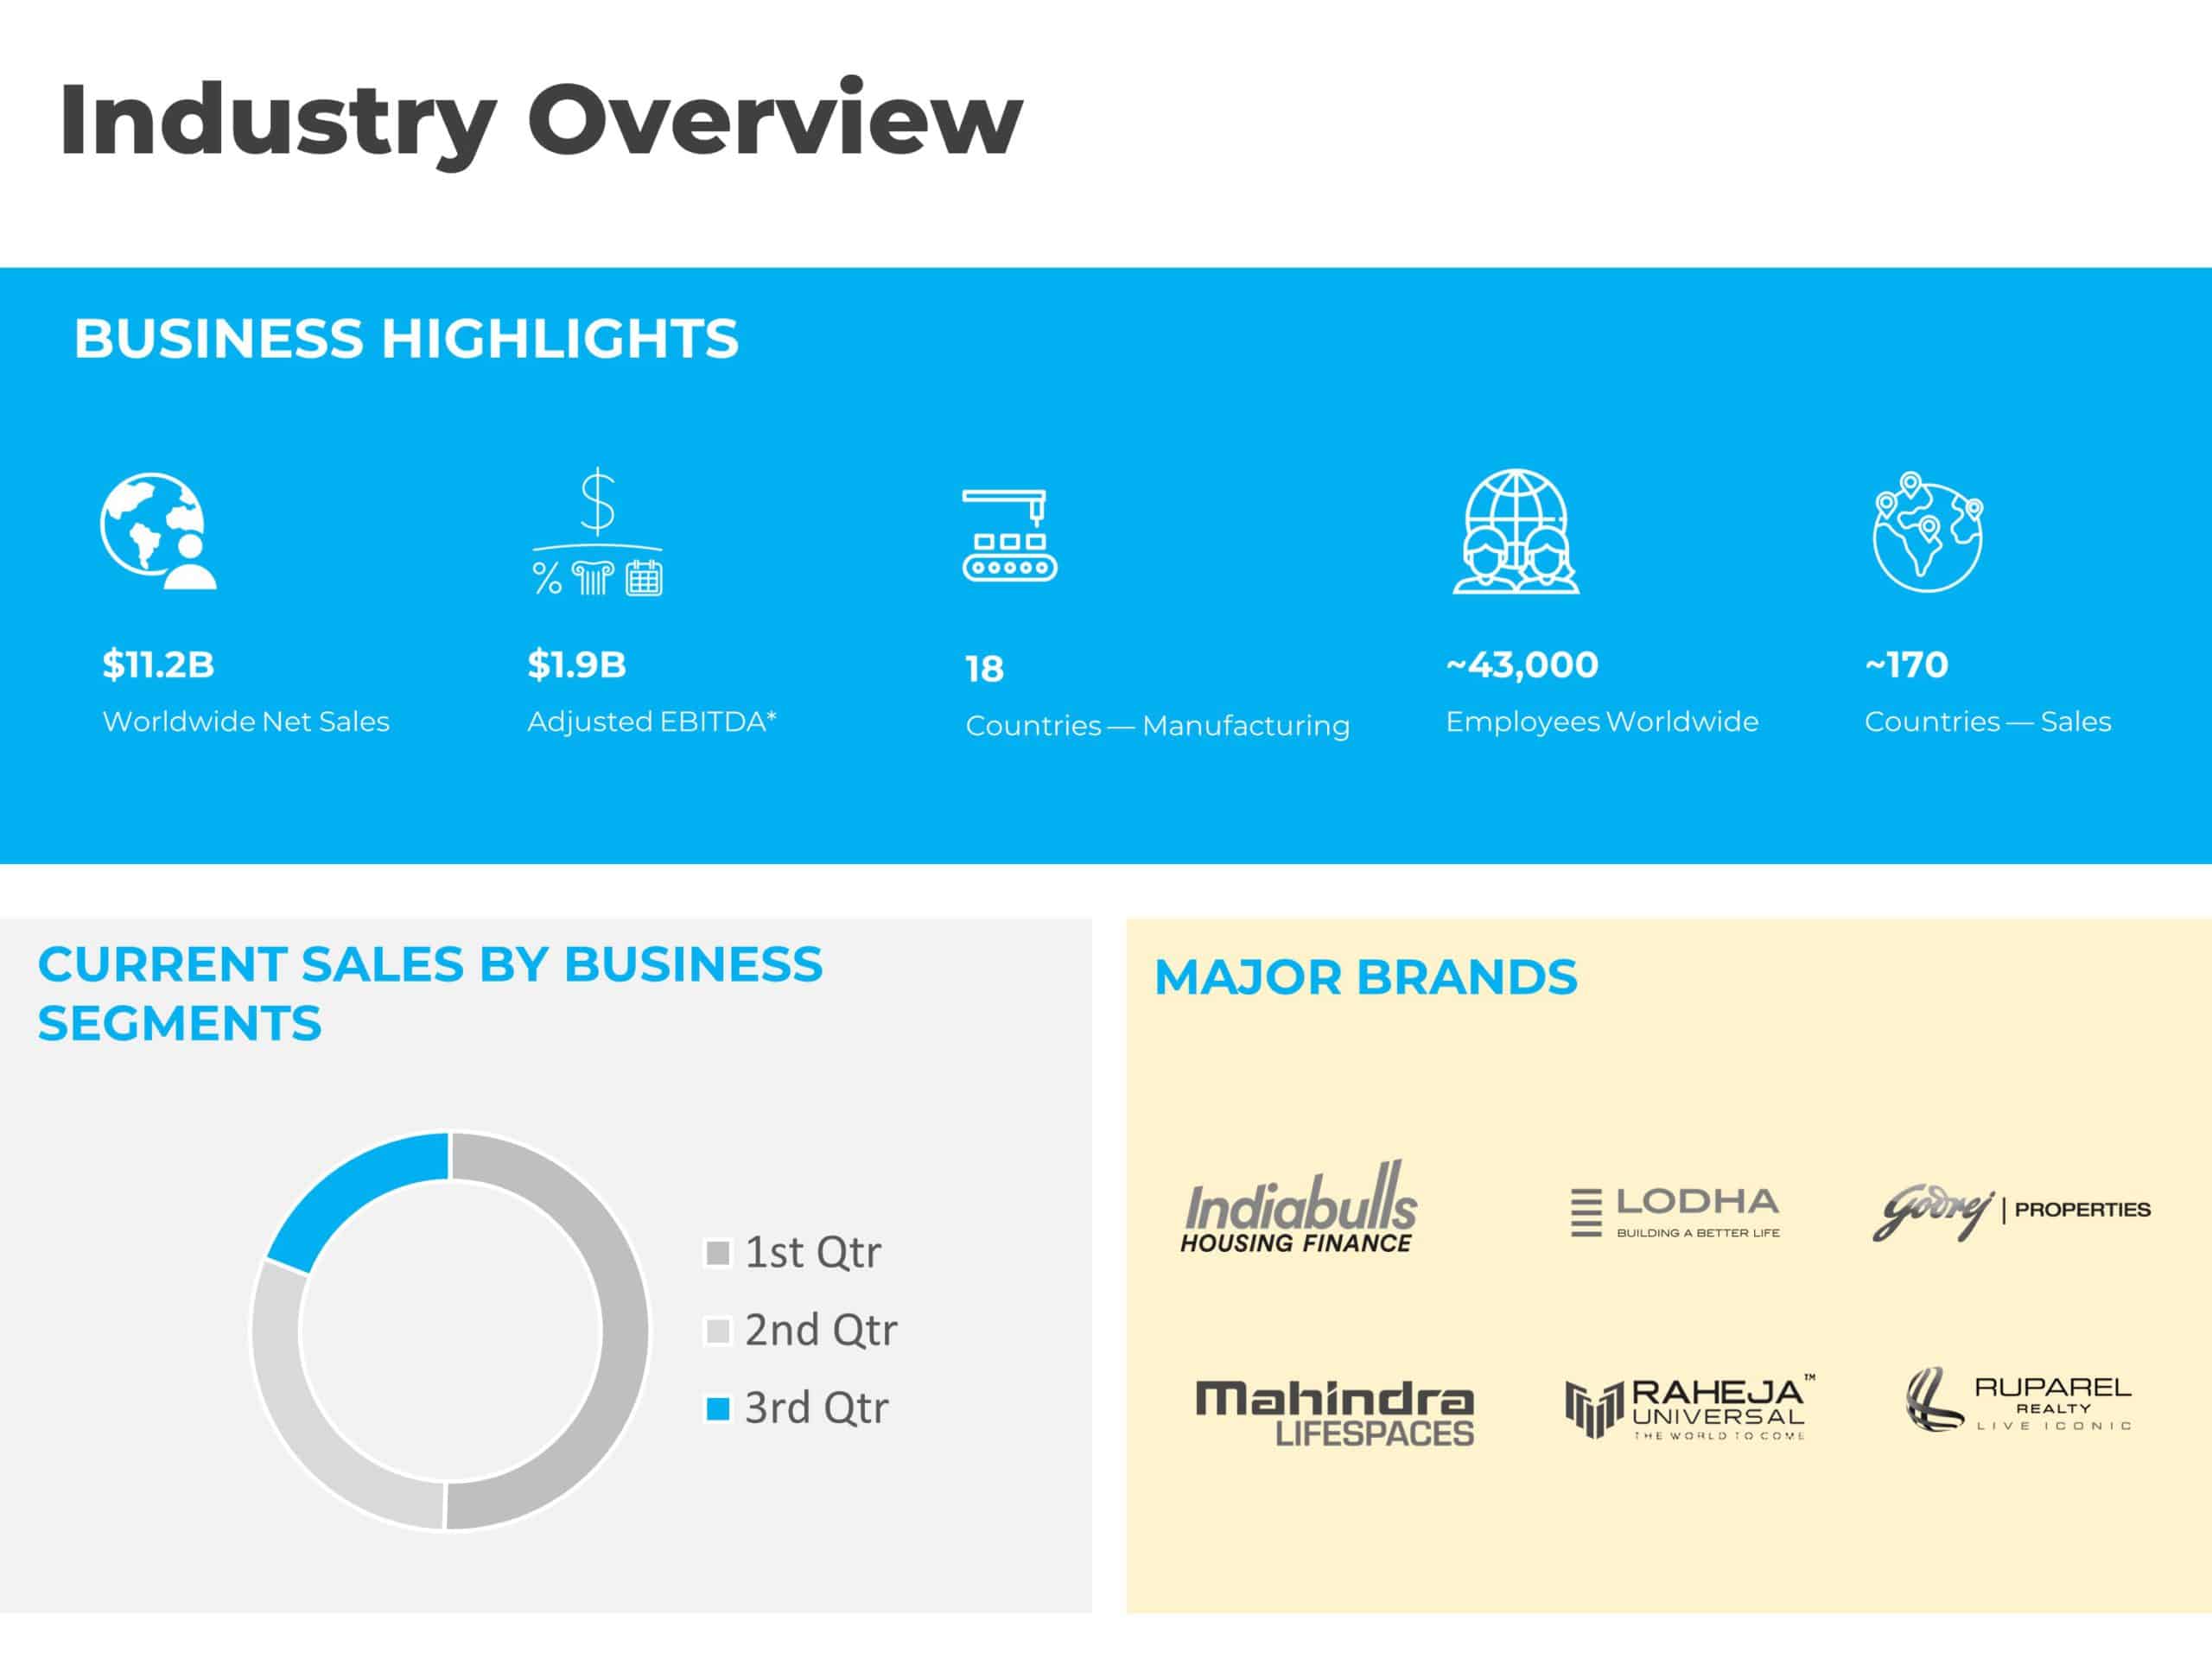 Industry Overview PowerPoint Template